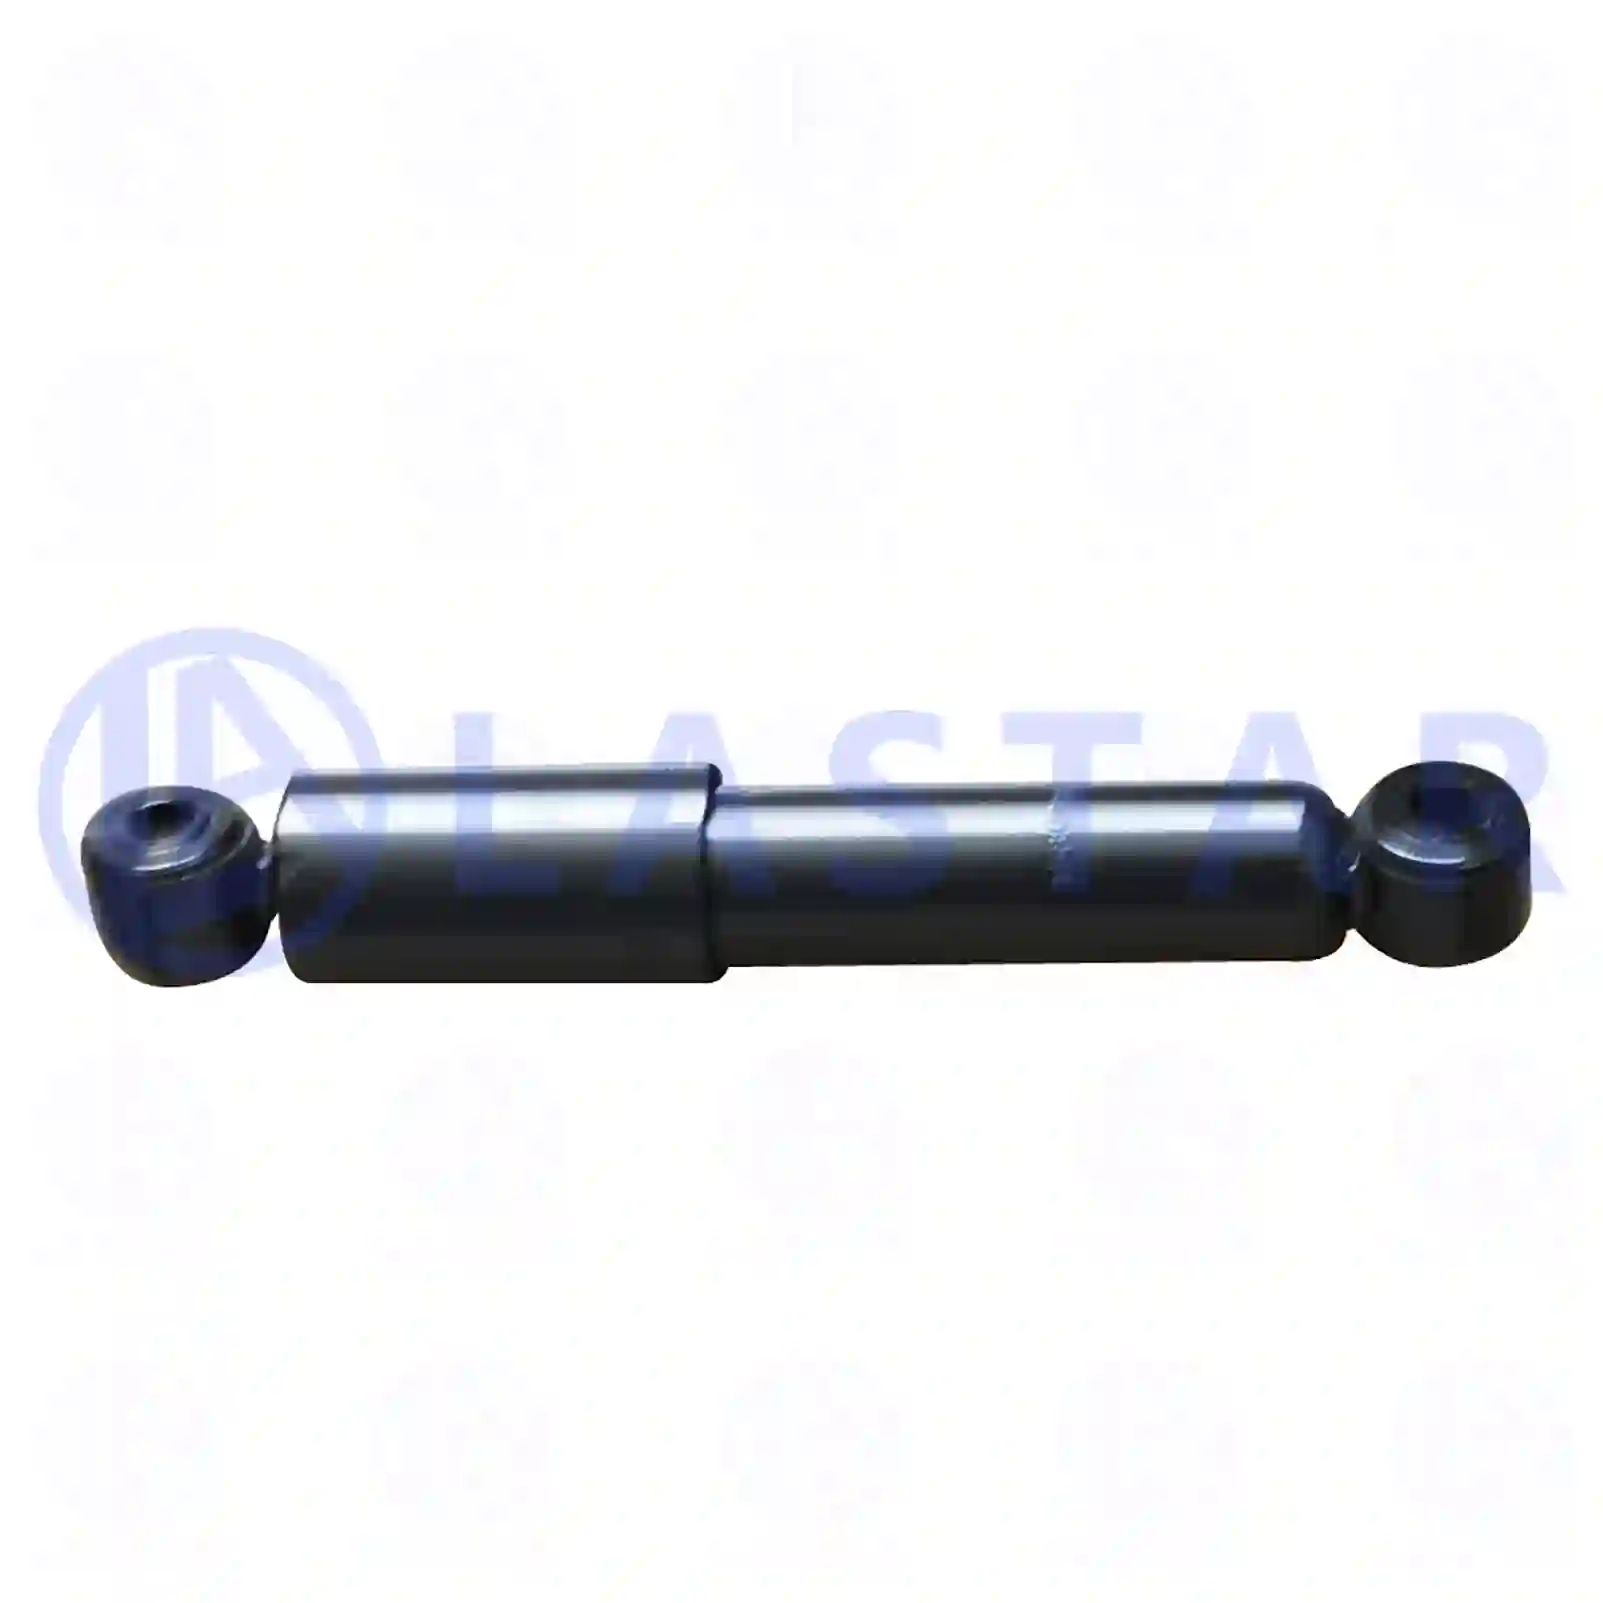 Cabin shock absorber, 77735713, 1580389, , , ||  77735713 Lastar Spare Part | Truck Spare Parts, Auotomotive Spare Parts Cabin shock absorber, 77735713, 1580389, , , ||  77735713 Lastar Spare Part | Truck Spare Parts, Auotomotive Spare Parts